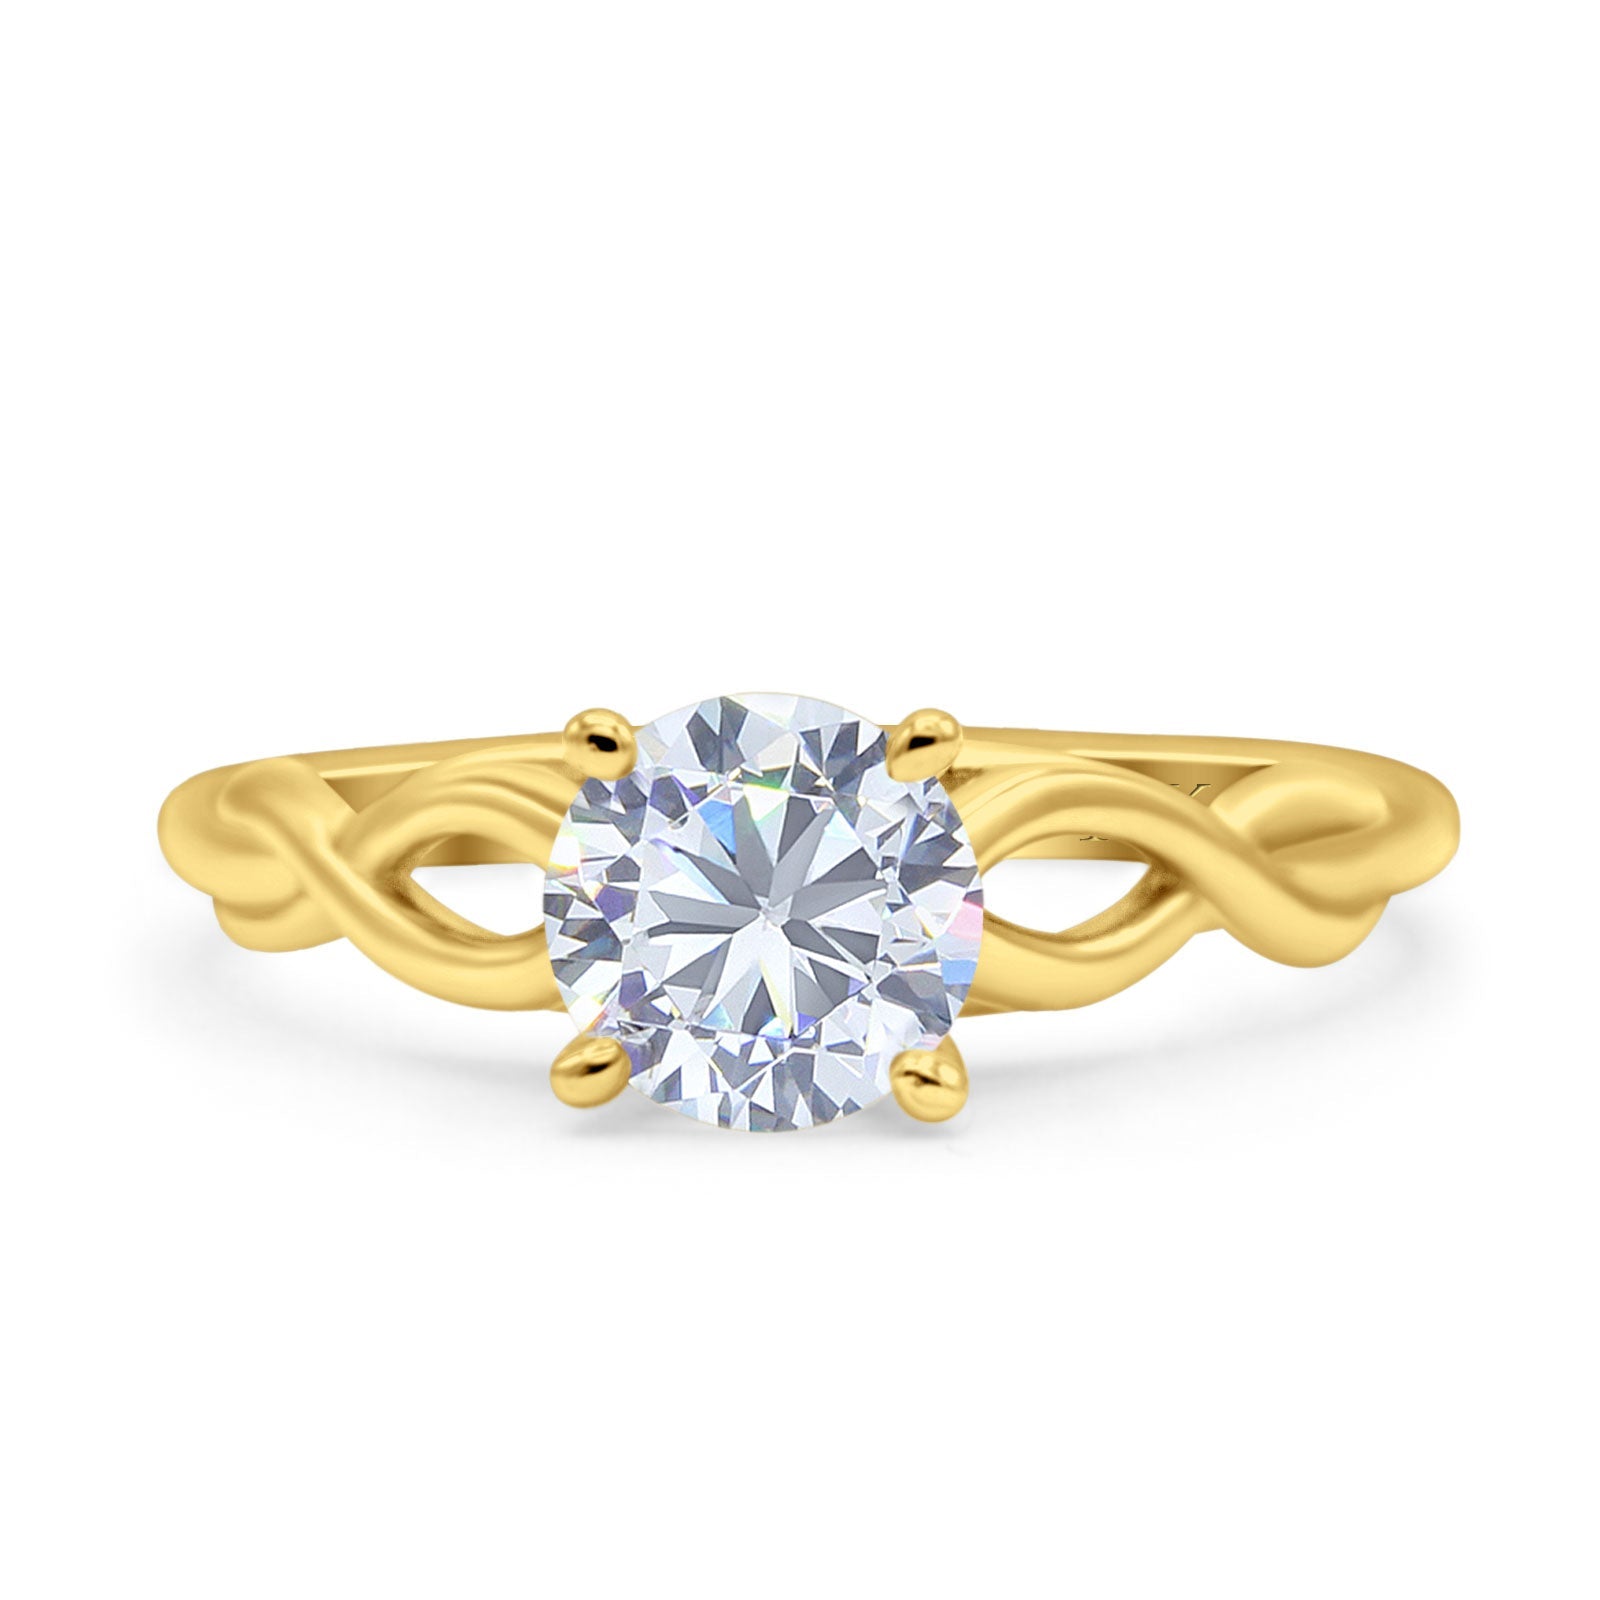 14K Gold Round Shape Solitaire Celtic Simulated Cubic Zirconia Wedding Engagement Ring